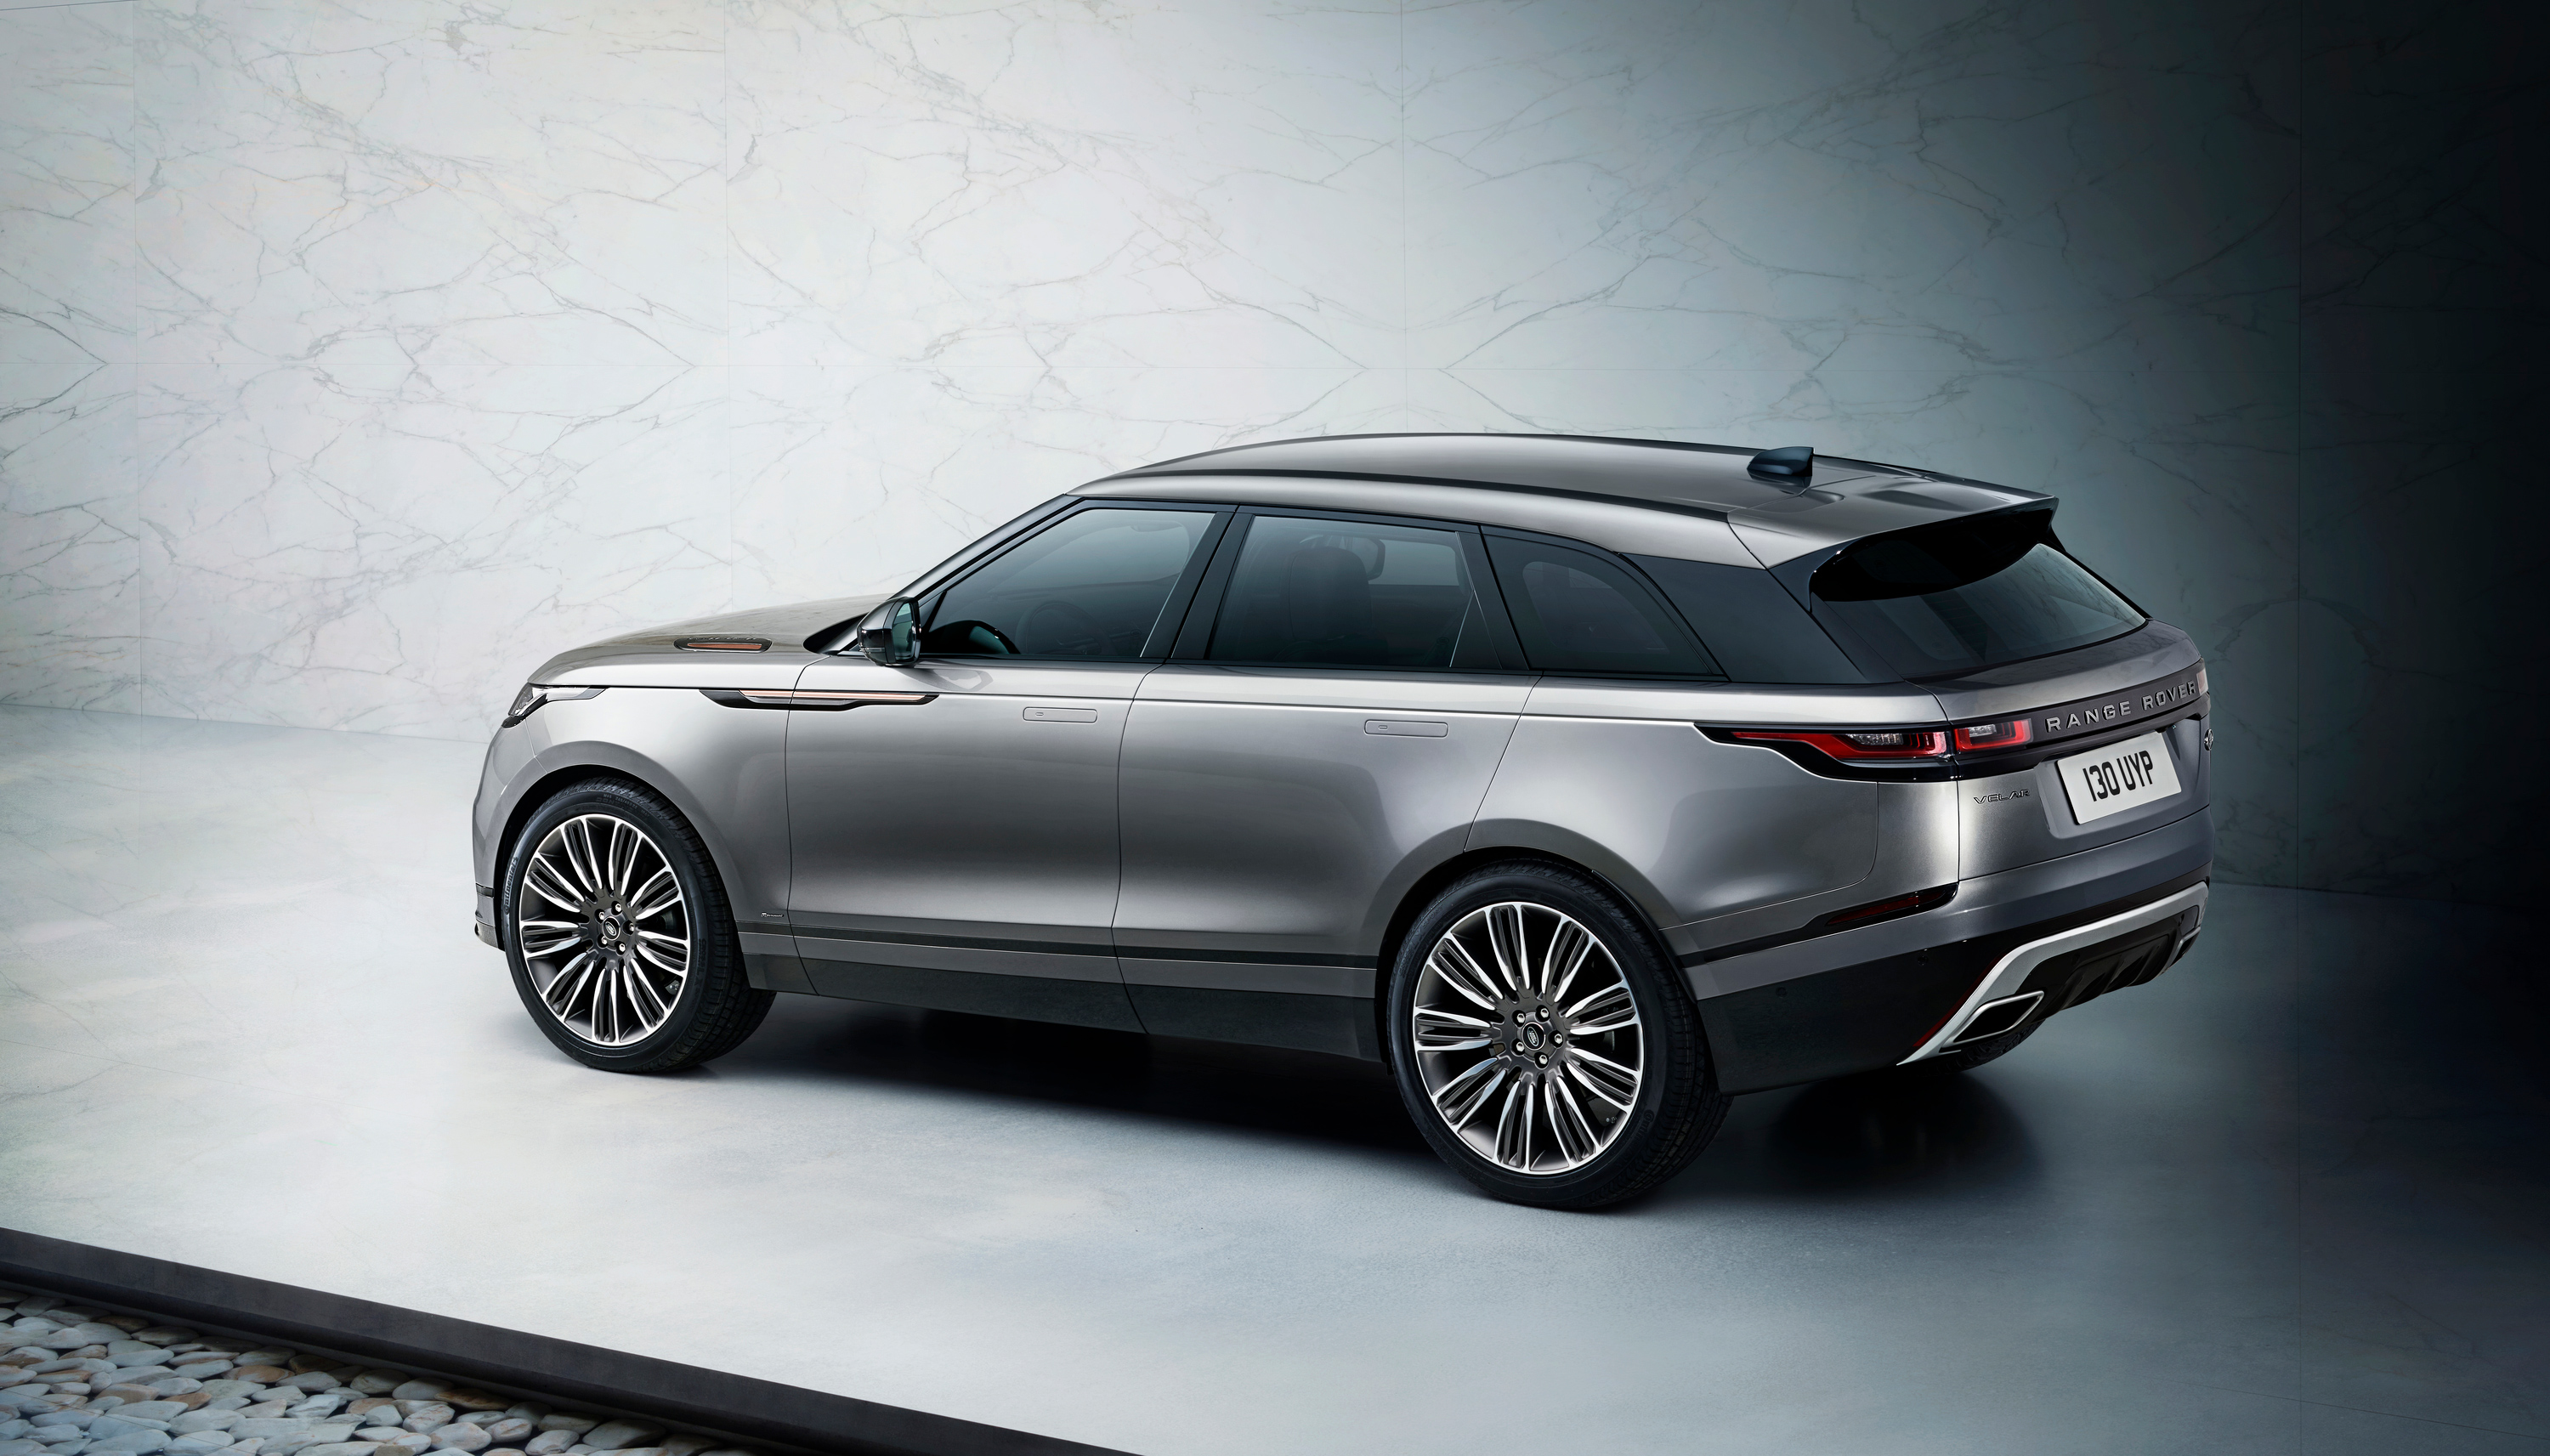 NEW RANGE ROVER VELAR INTRODUCED IN INDIA WITH PRICES FROM ₹ 79.87 Lakh